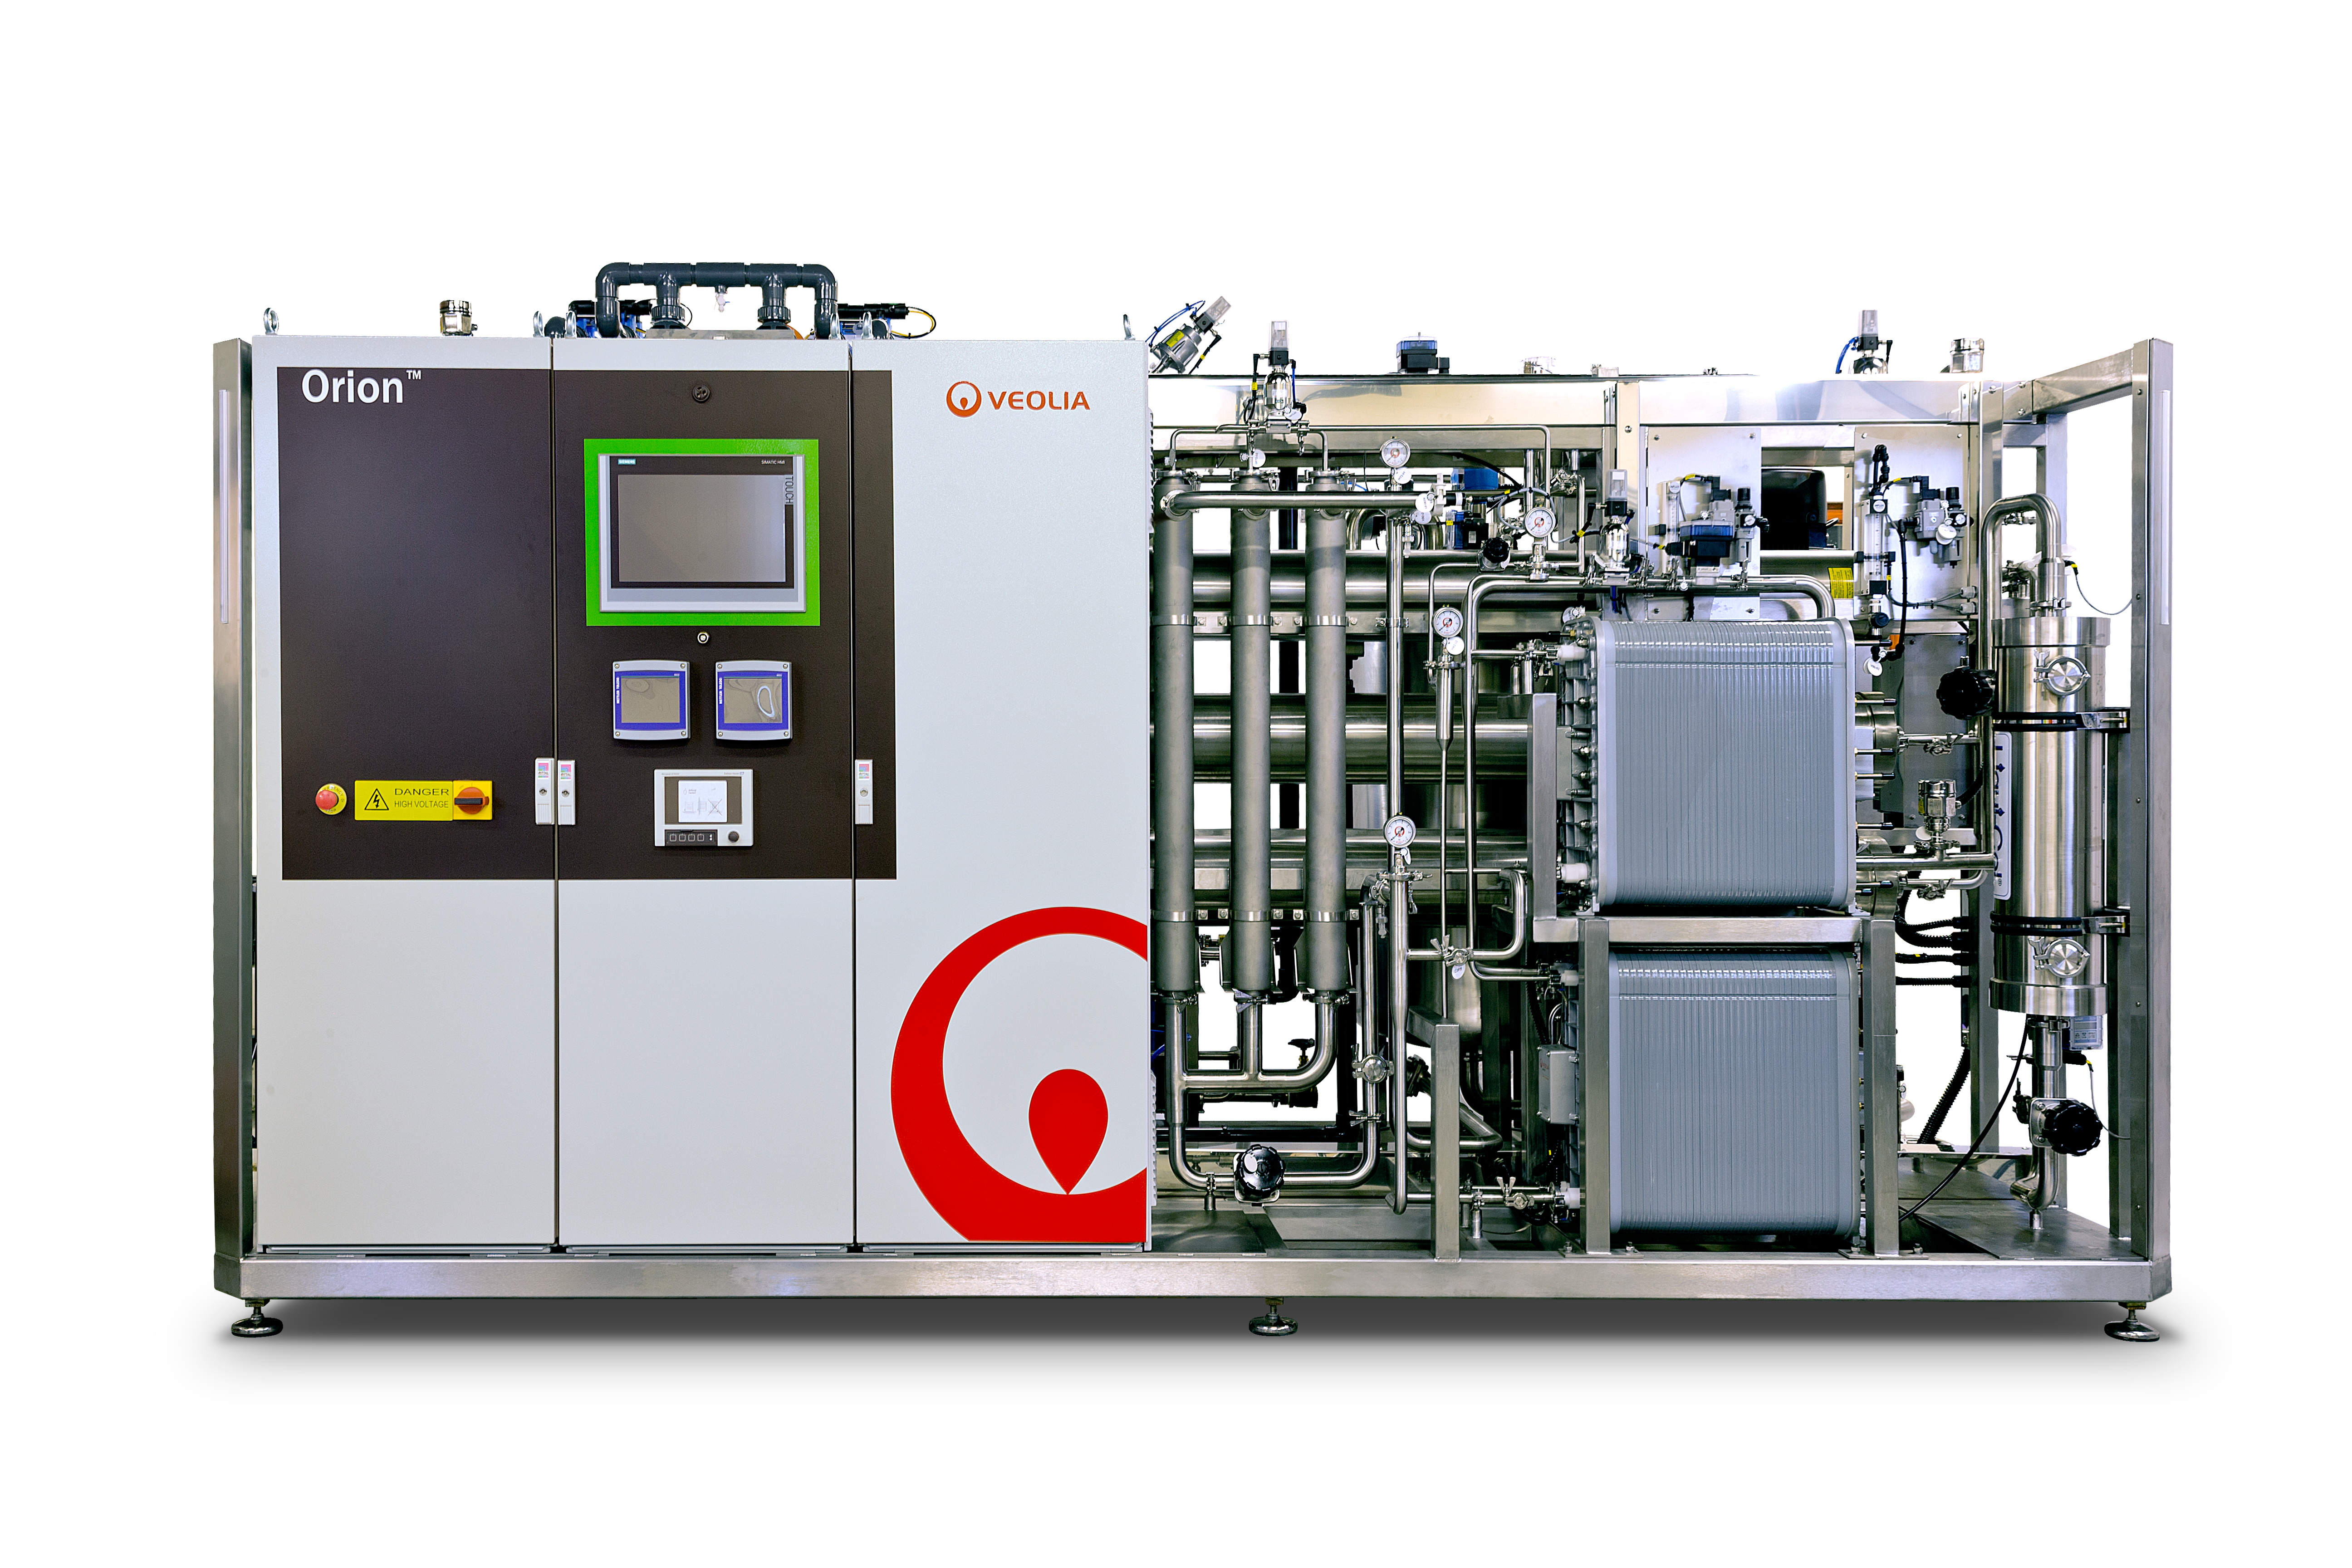 Veolia Marks 20 Years of Reliable & Proven  Purified Water Technology with Orion™